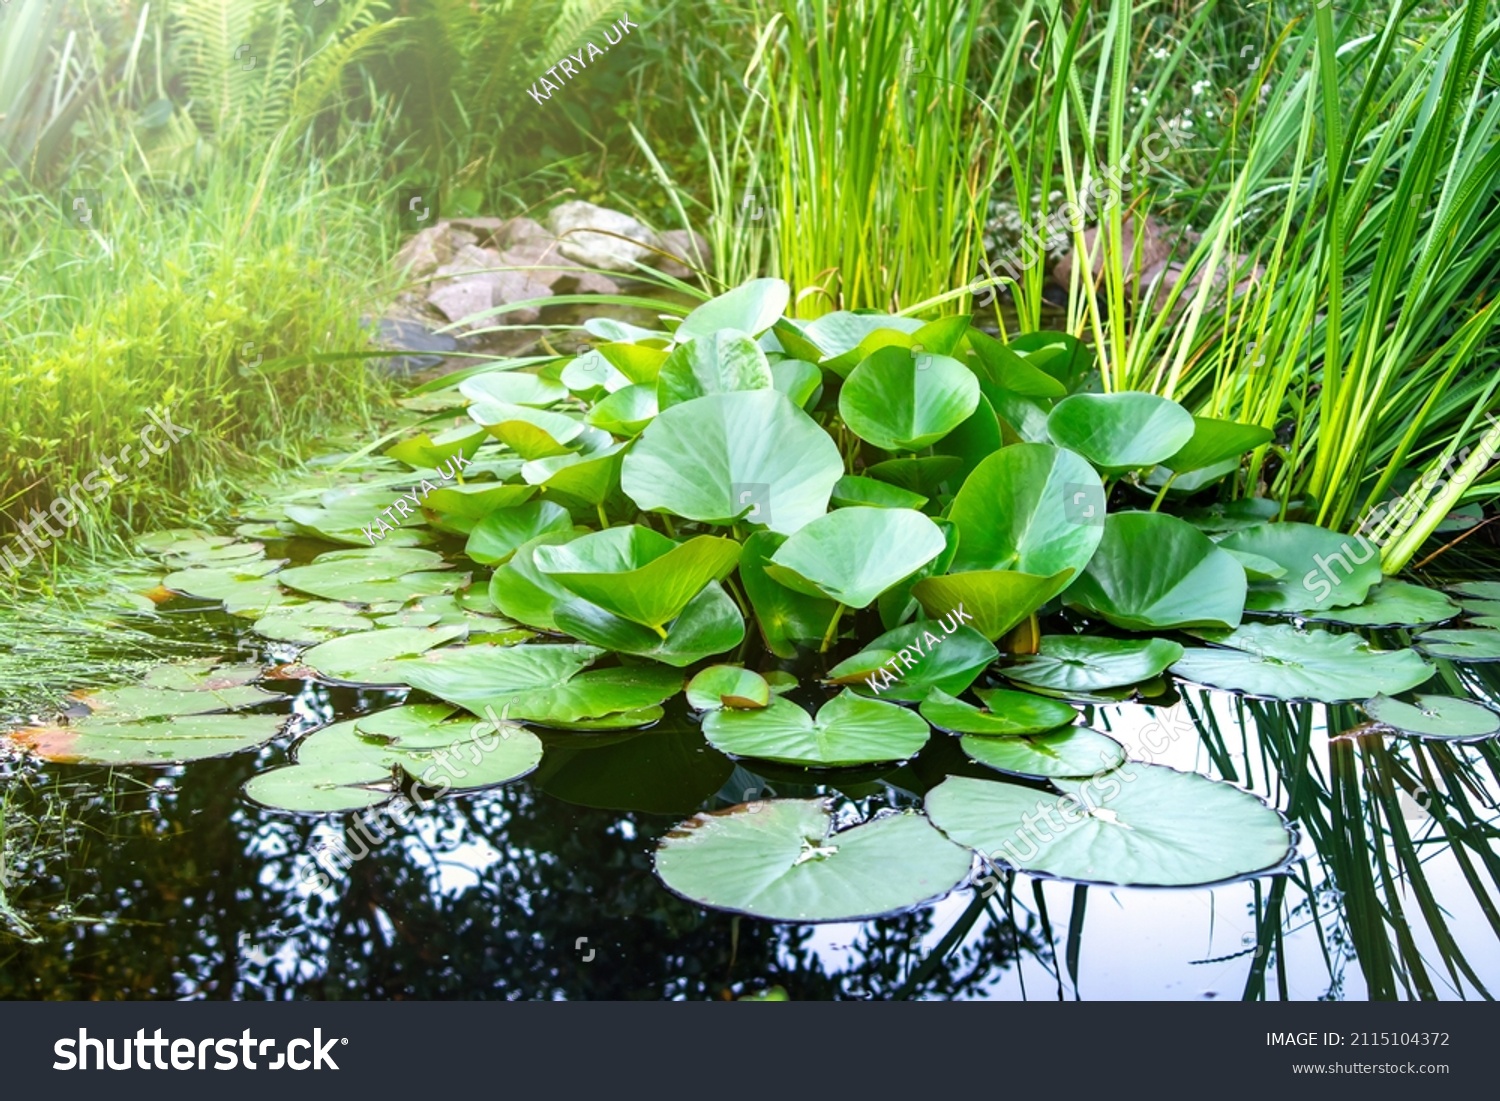 Artificial decorative pond in the garden with living aquatic plants. Garden area for relaxing by the water surface. Landscape design concept. #2115104372